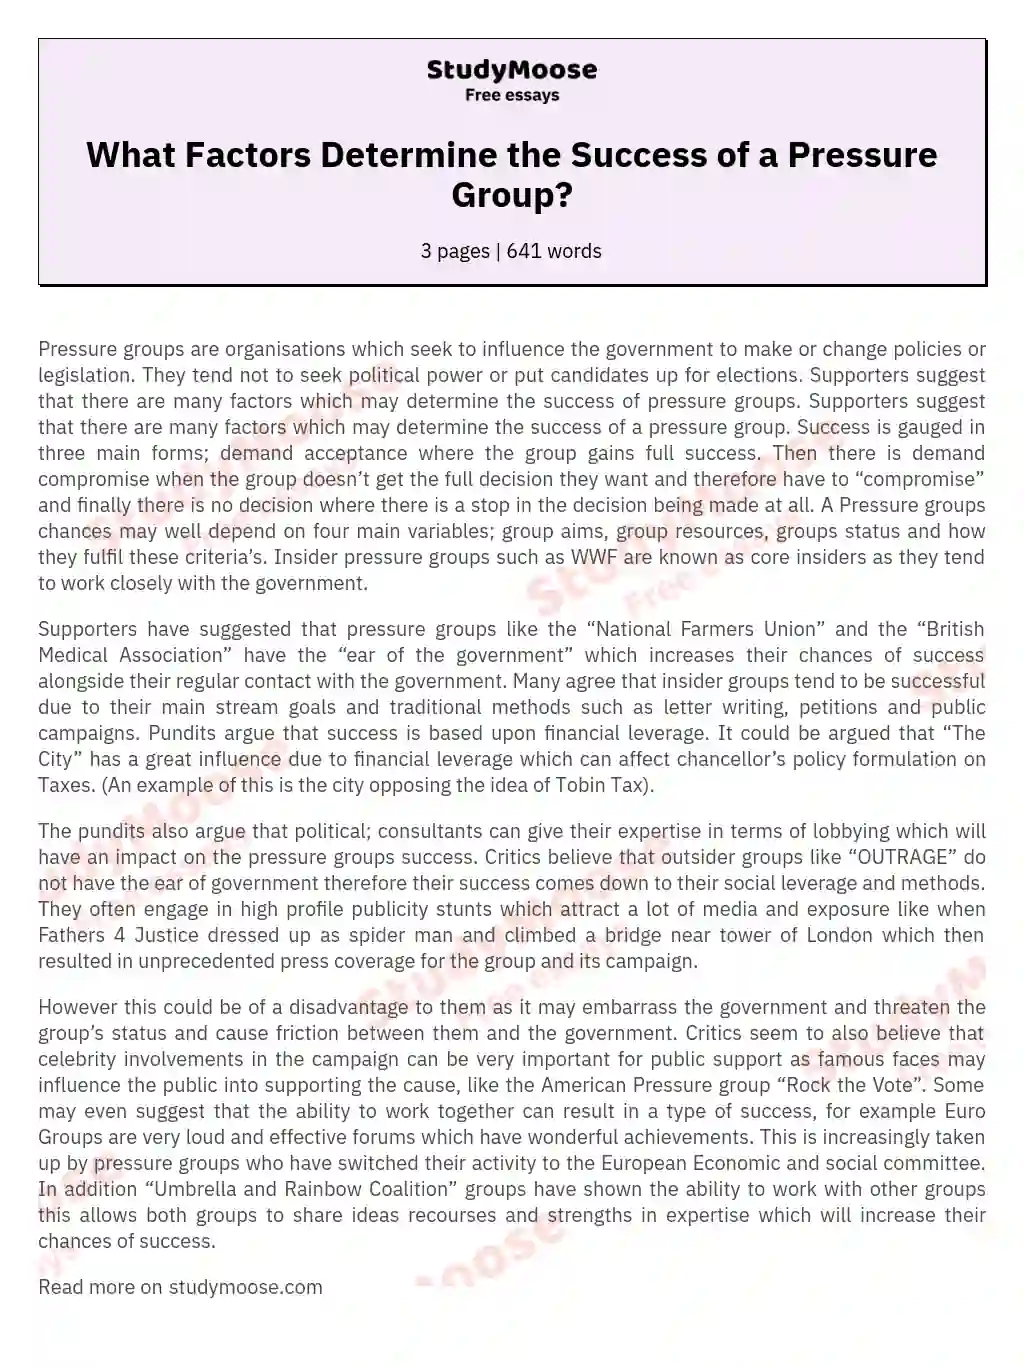 What Factors Determine the Success of a Pressure Group? essay